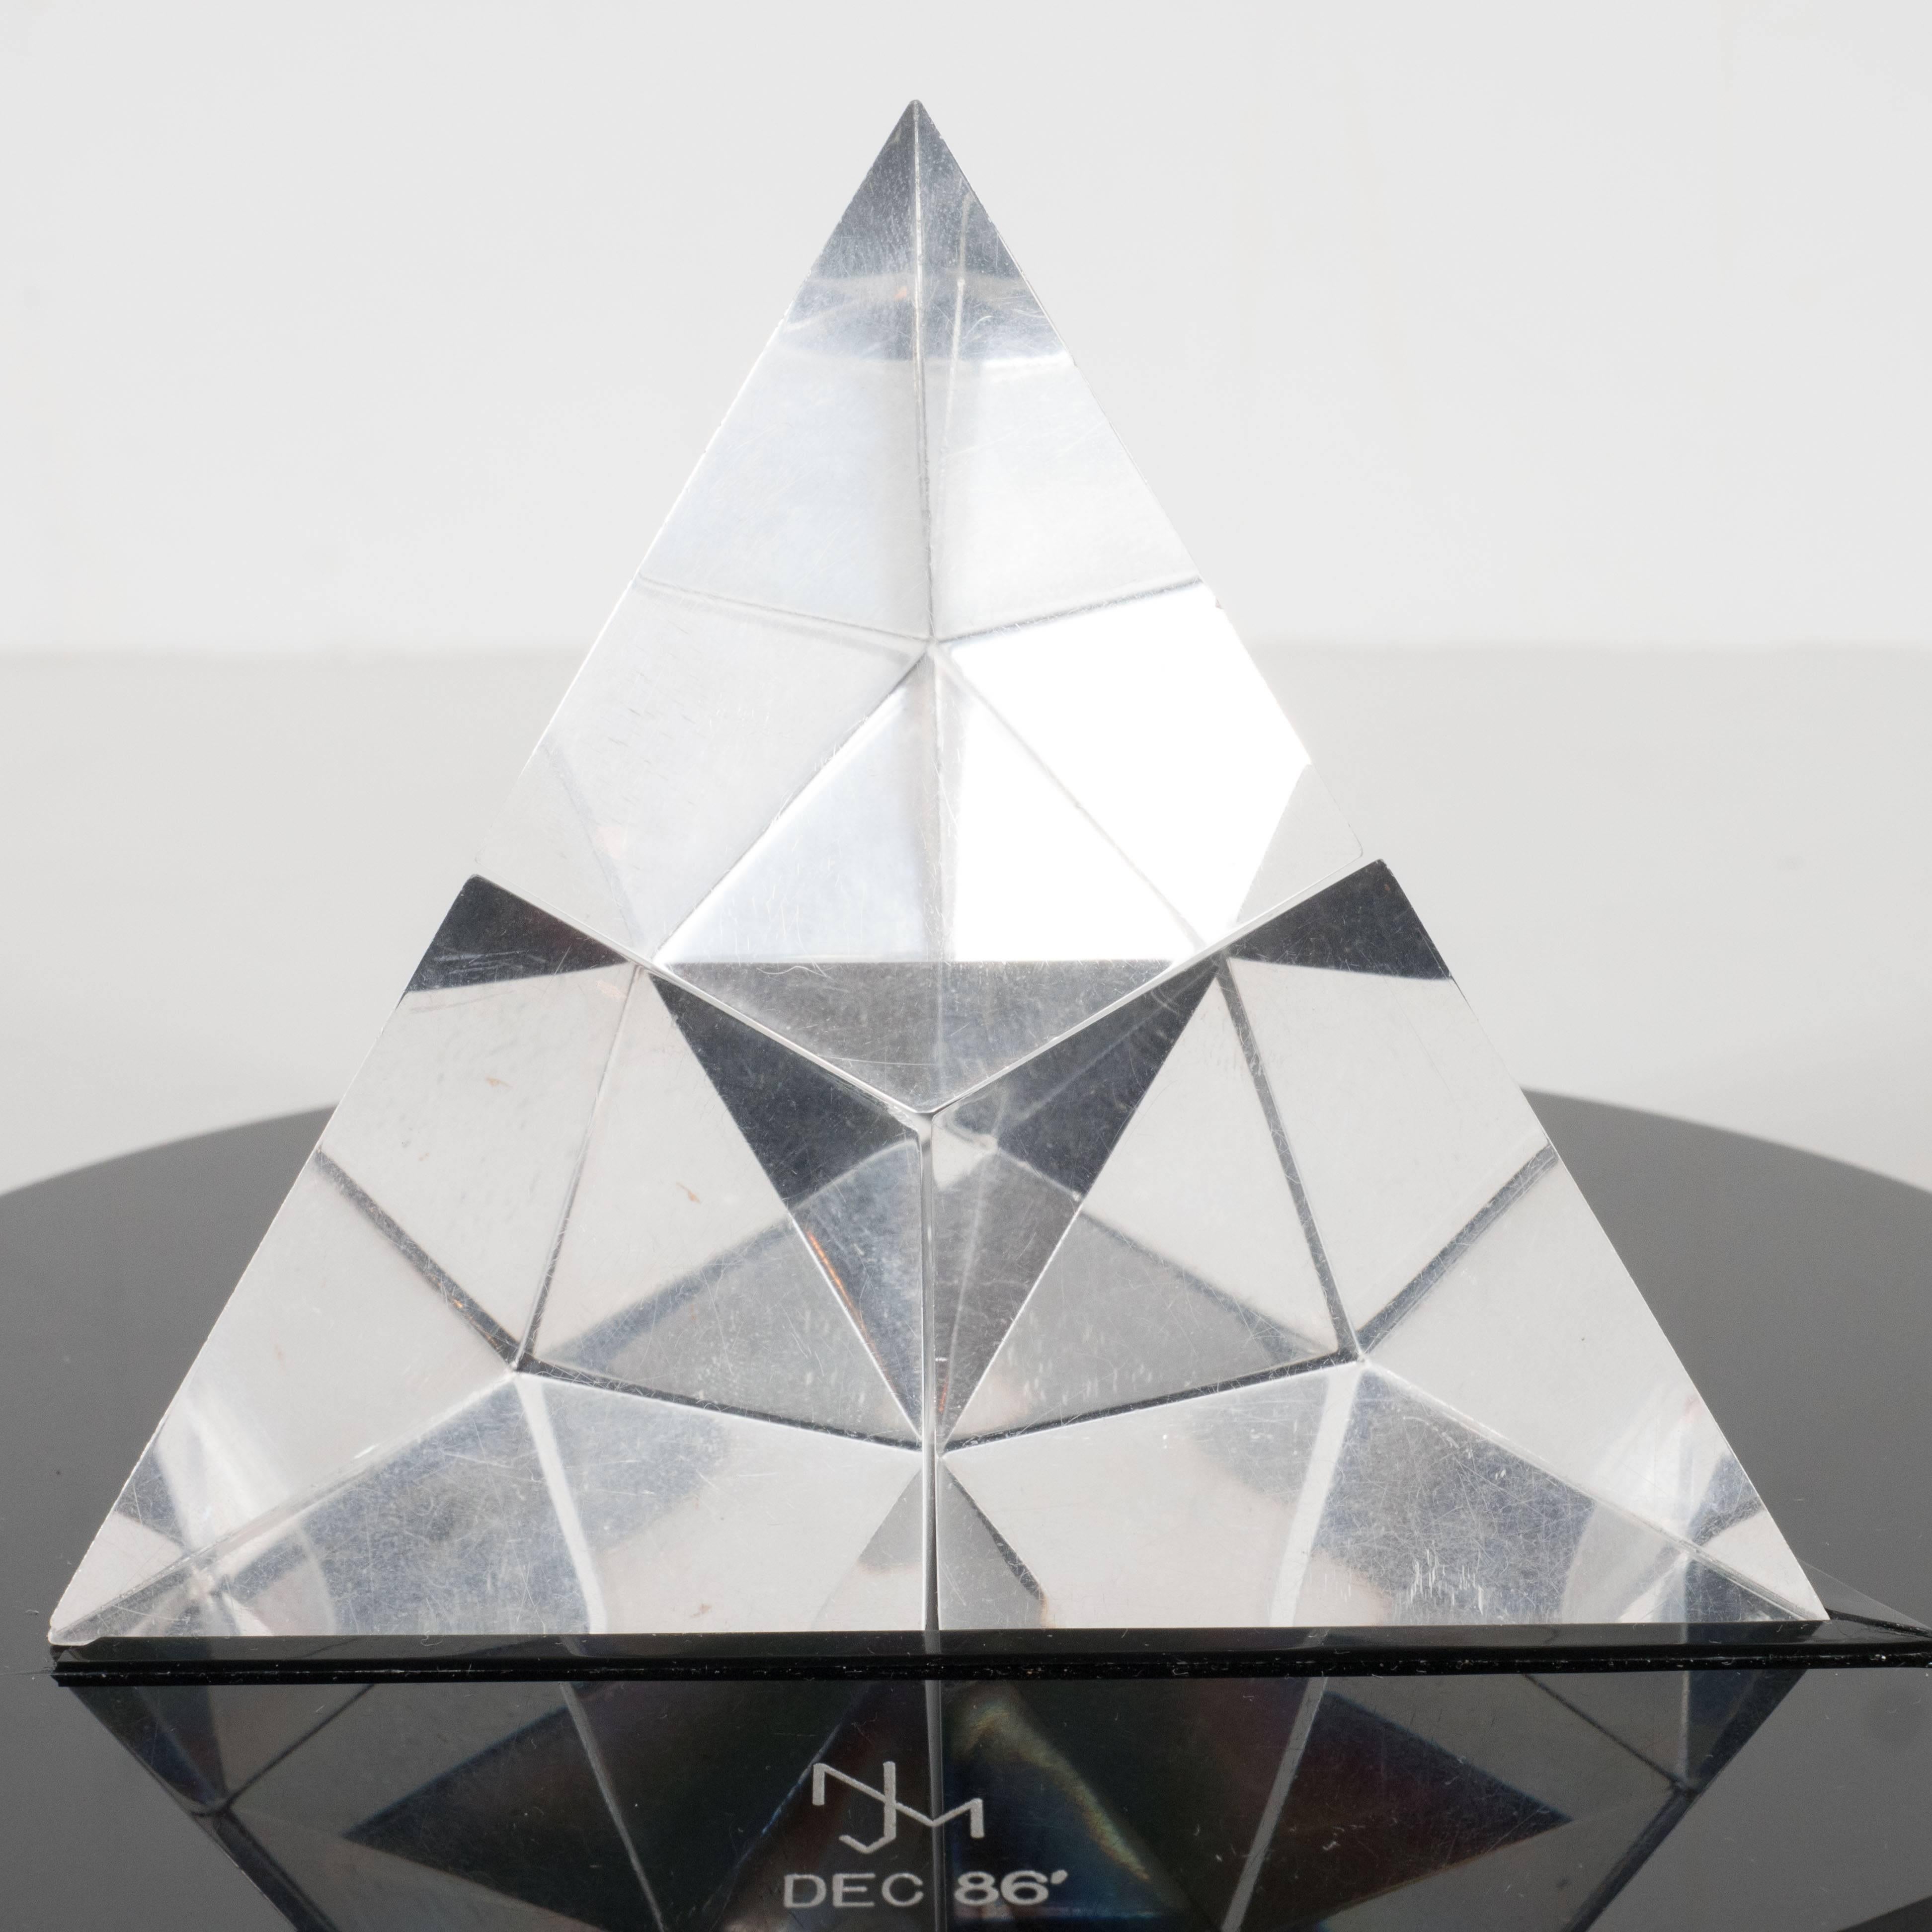 This dynamic Modernist pyramid sculpture is composed of four beveled pieces of Lucite that fit together like a puzzle. When fully assembled, the structure appears like a radiant pyramid-shaped diamond resting on a circular ebony base. This is truly